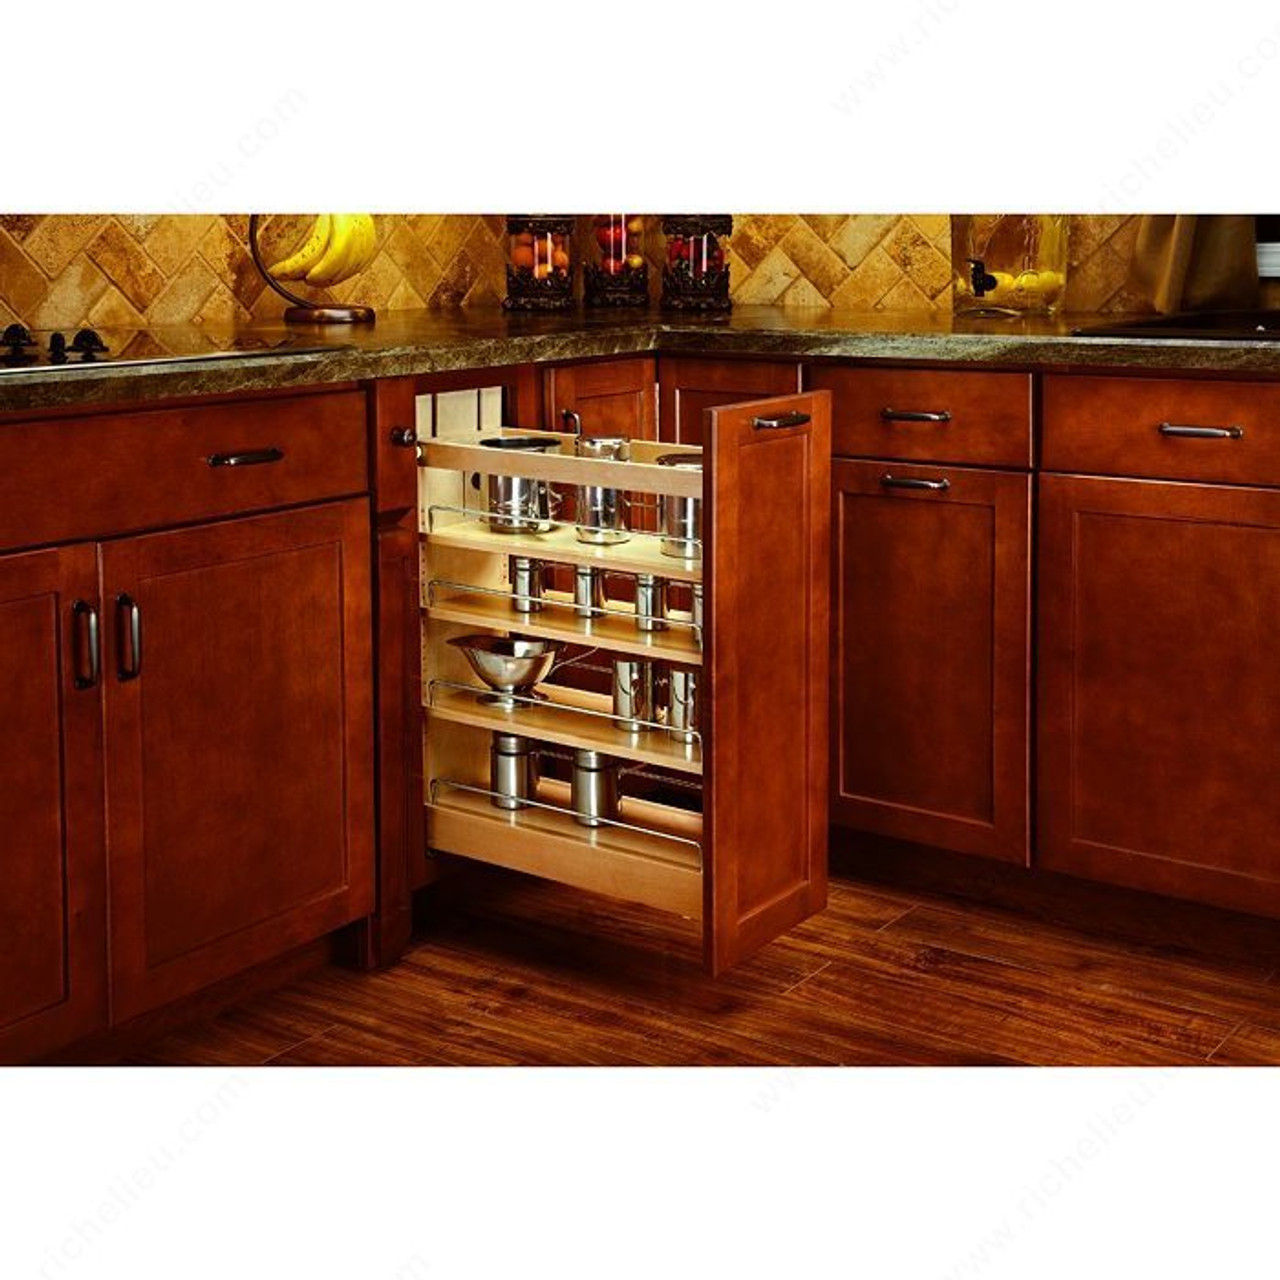 Rev-A-Shelf complete Pull-out Drawer System - Richelieu Hardware